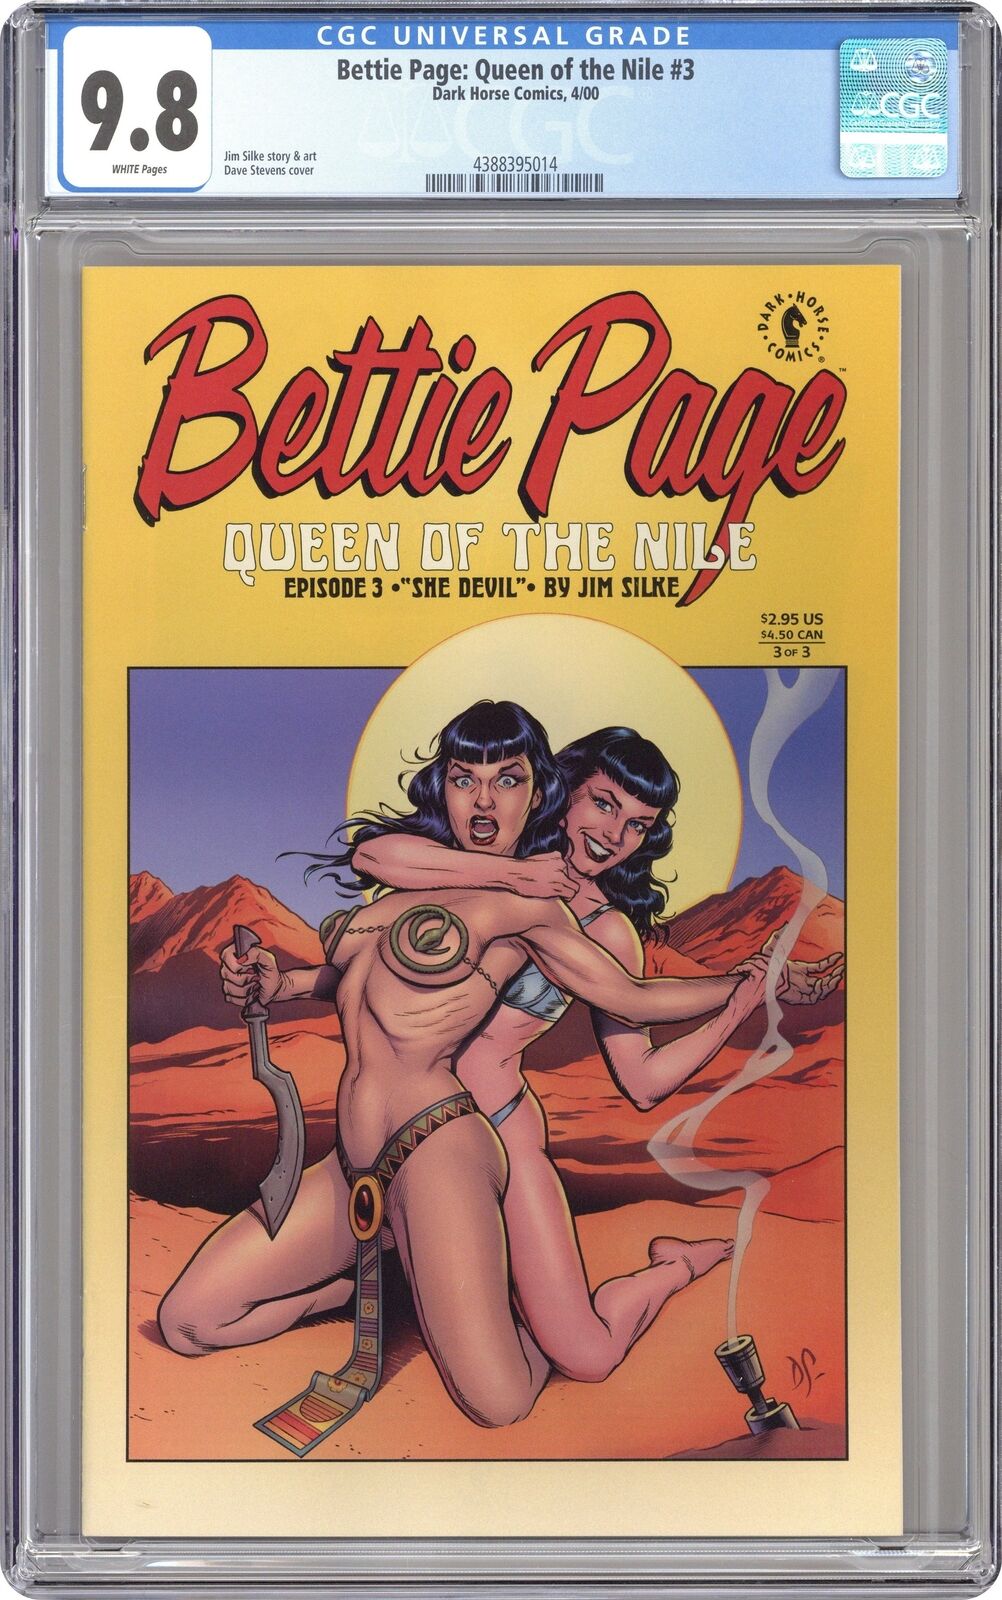 Bettie Page Queen of the Nile #3 CGC 9.8 2000 4388395014